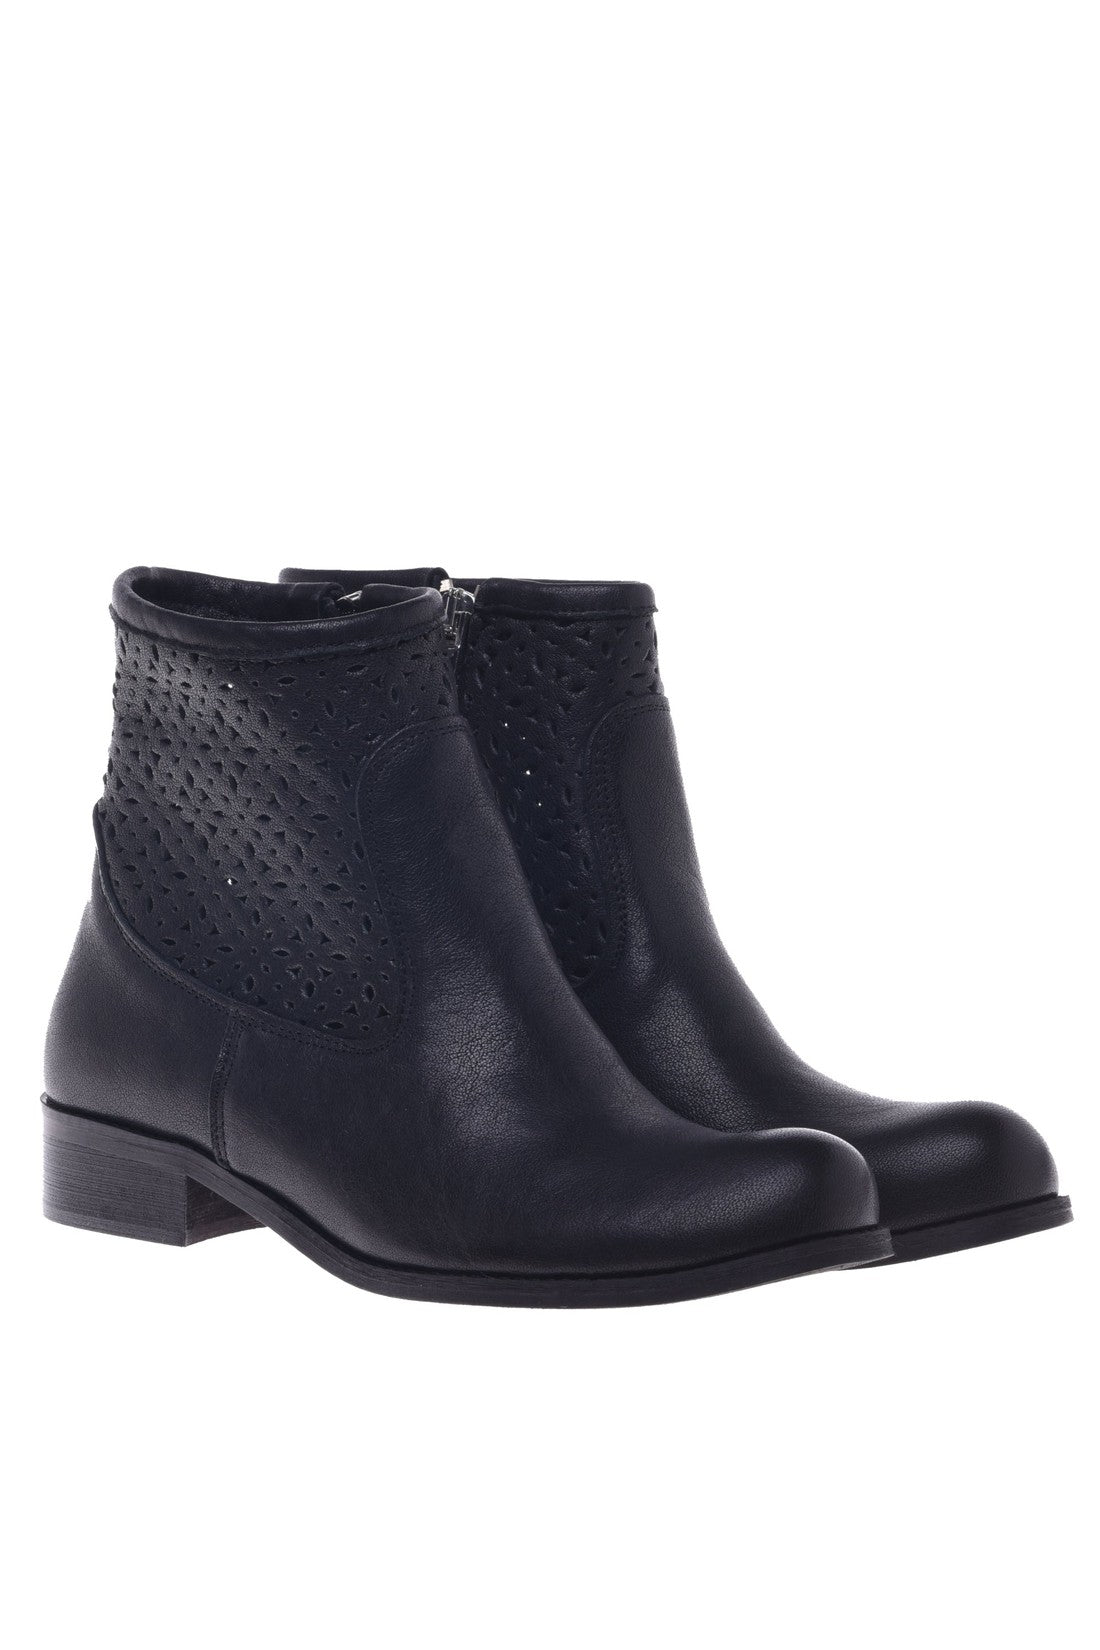 Ankle boot in black calfskin